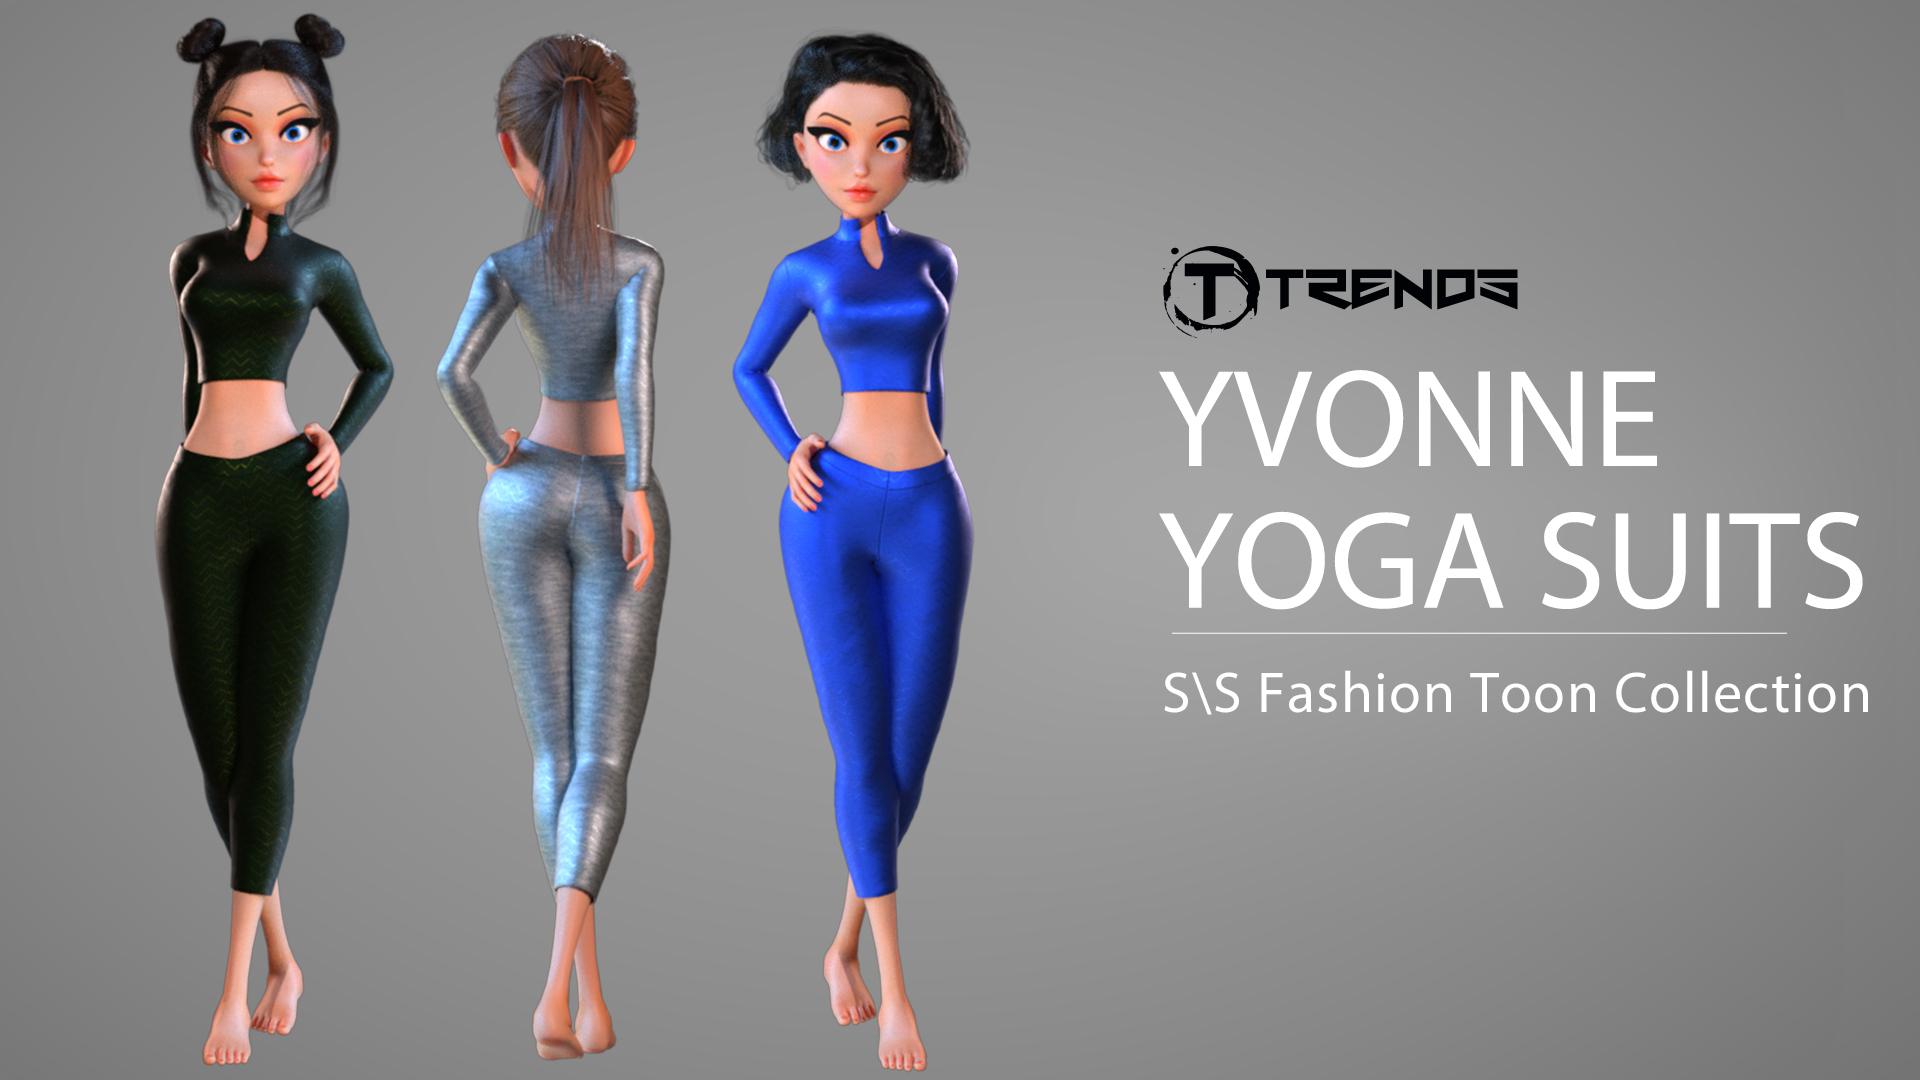 Yvonne's Yoga Outfits